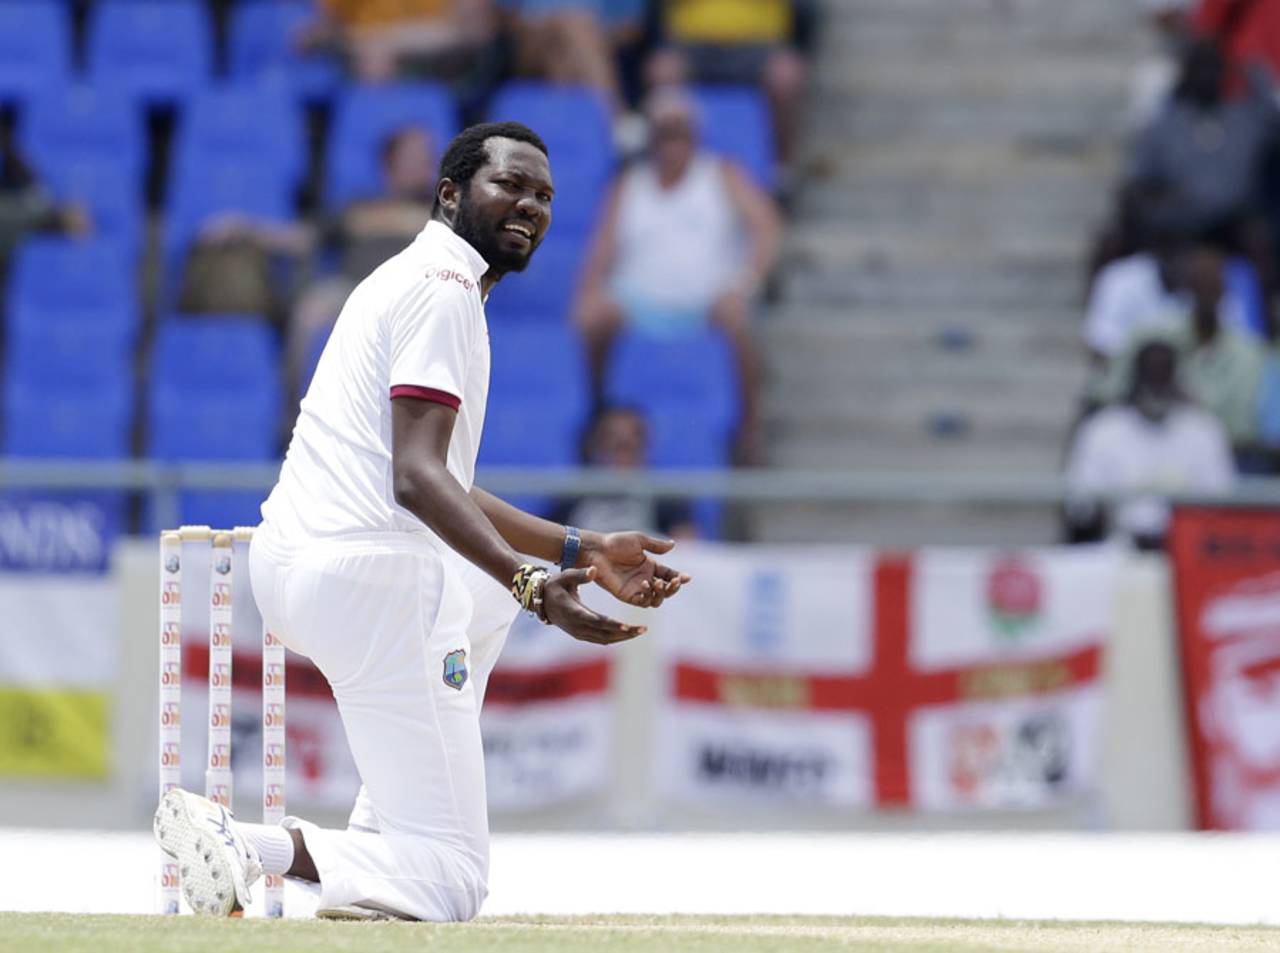 It was another day of toil for Sulieman Benn, West Indies v England, 1st Test, North Sound, 4th day, April 16, 2015